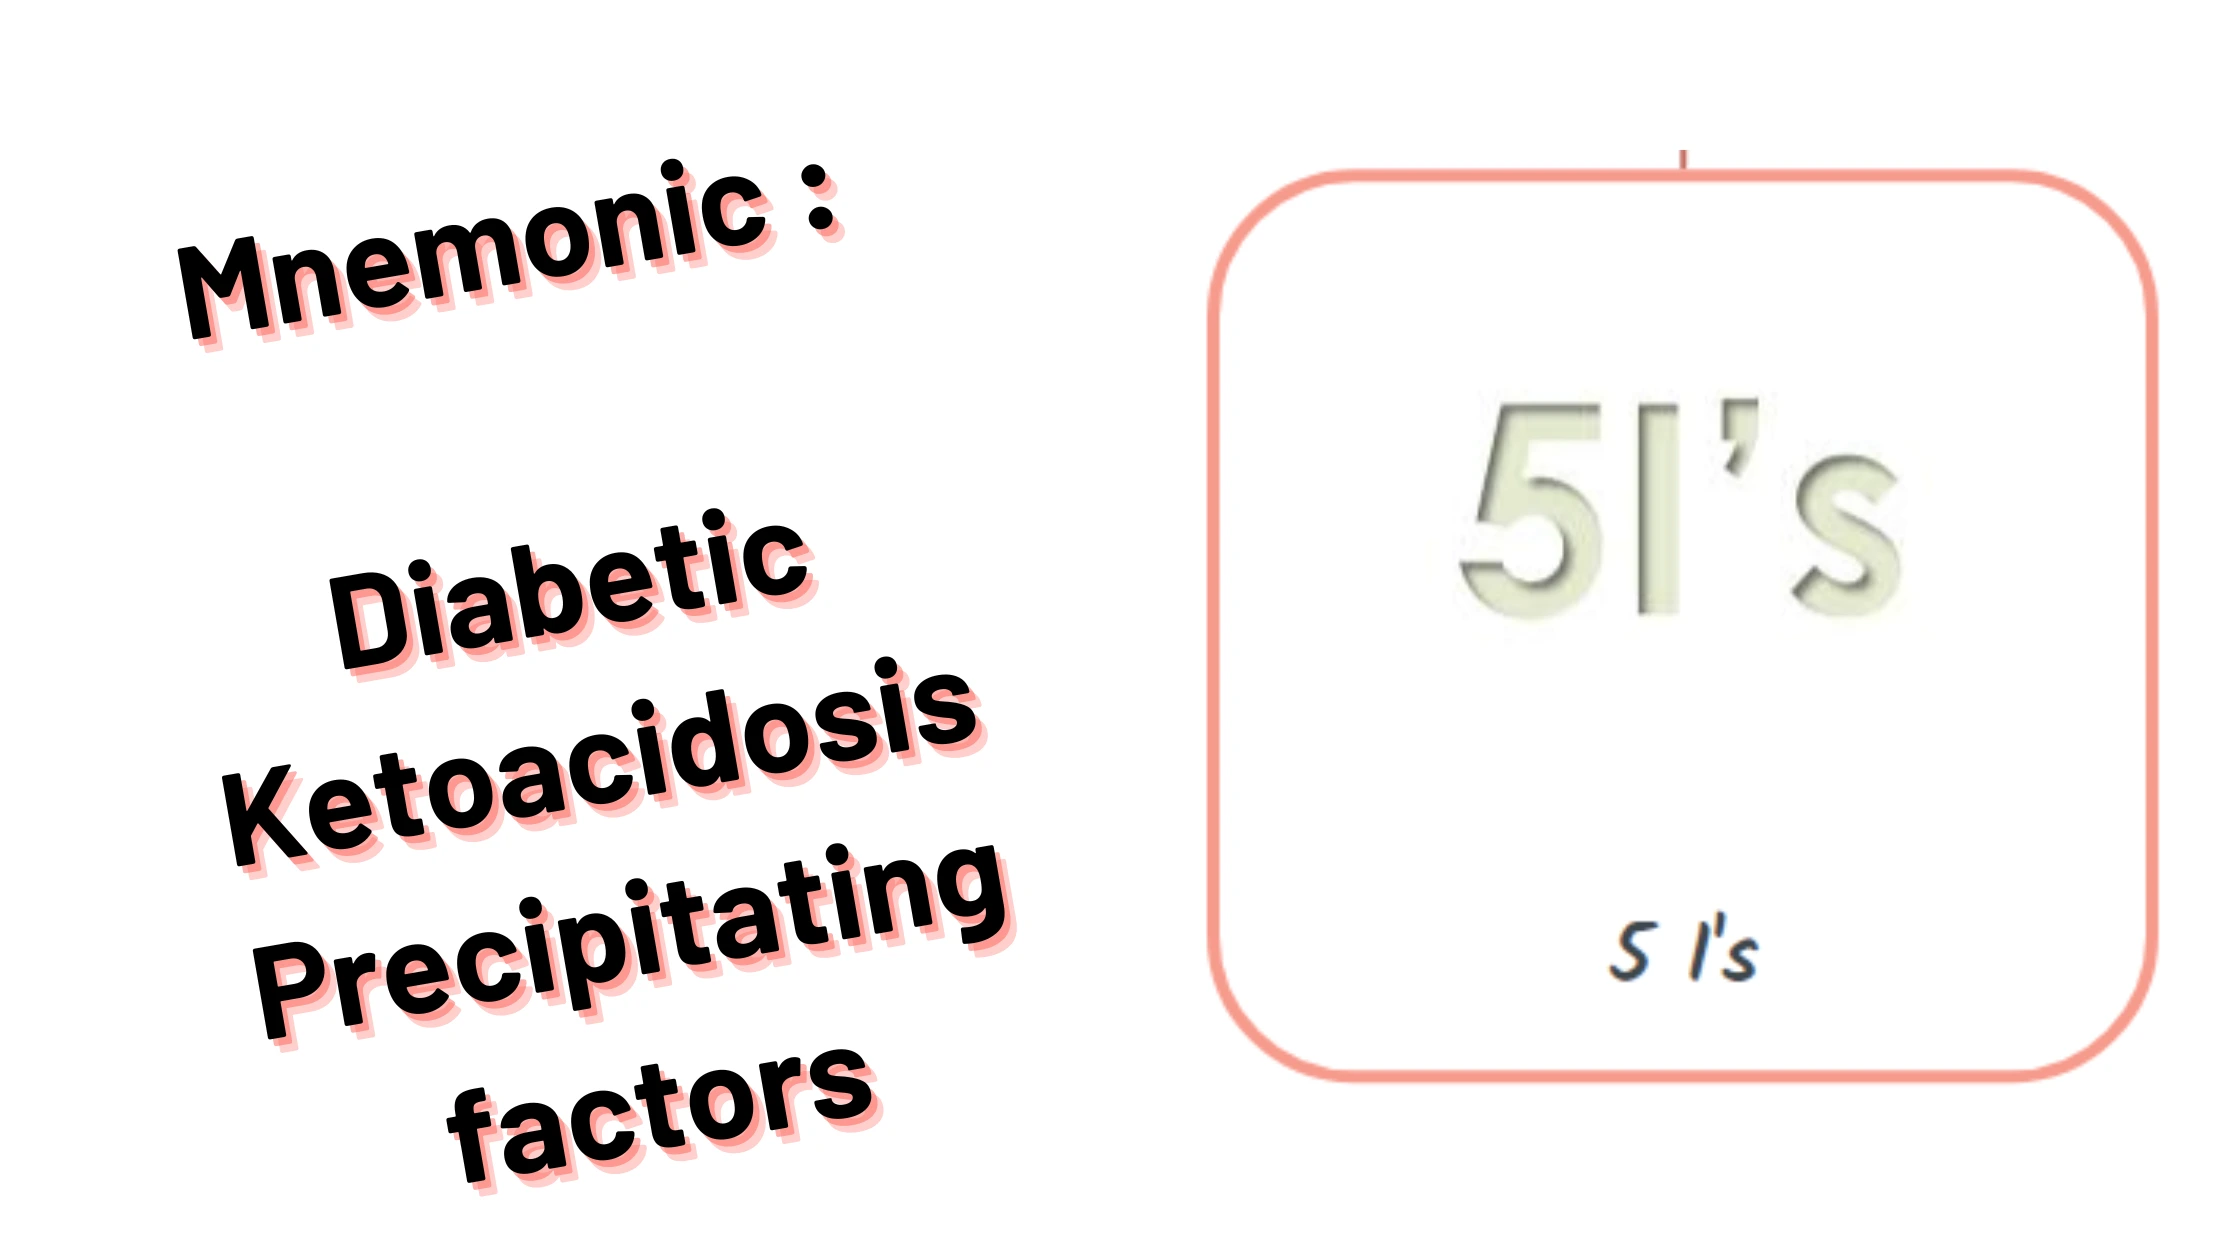 You are currently viewing [Very Cool]Mnemonic : Diabetic Ketoacidosis Precipitating factors